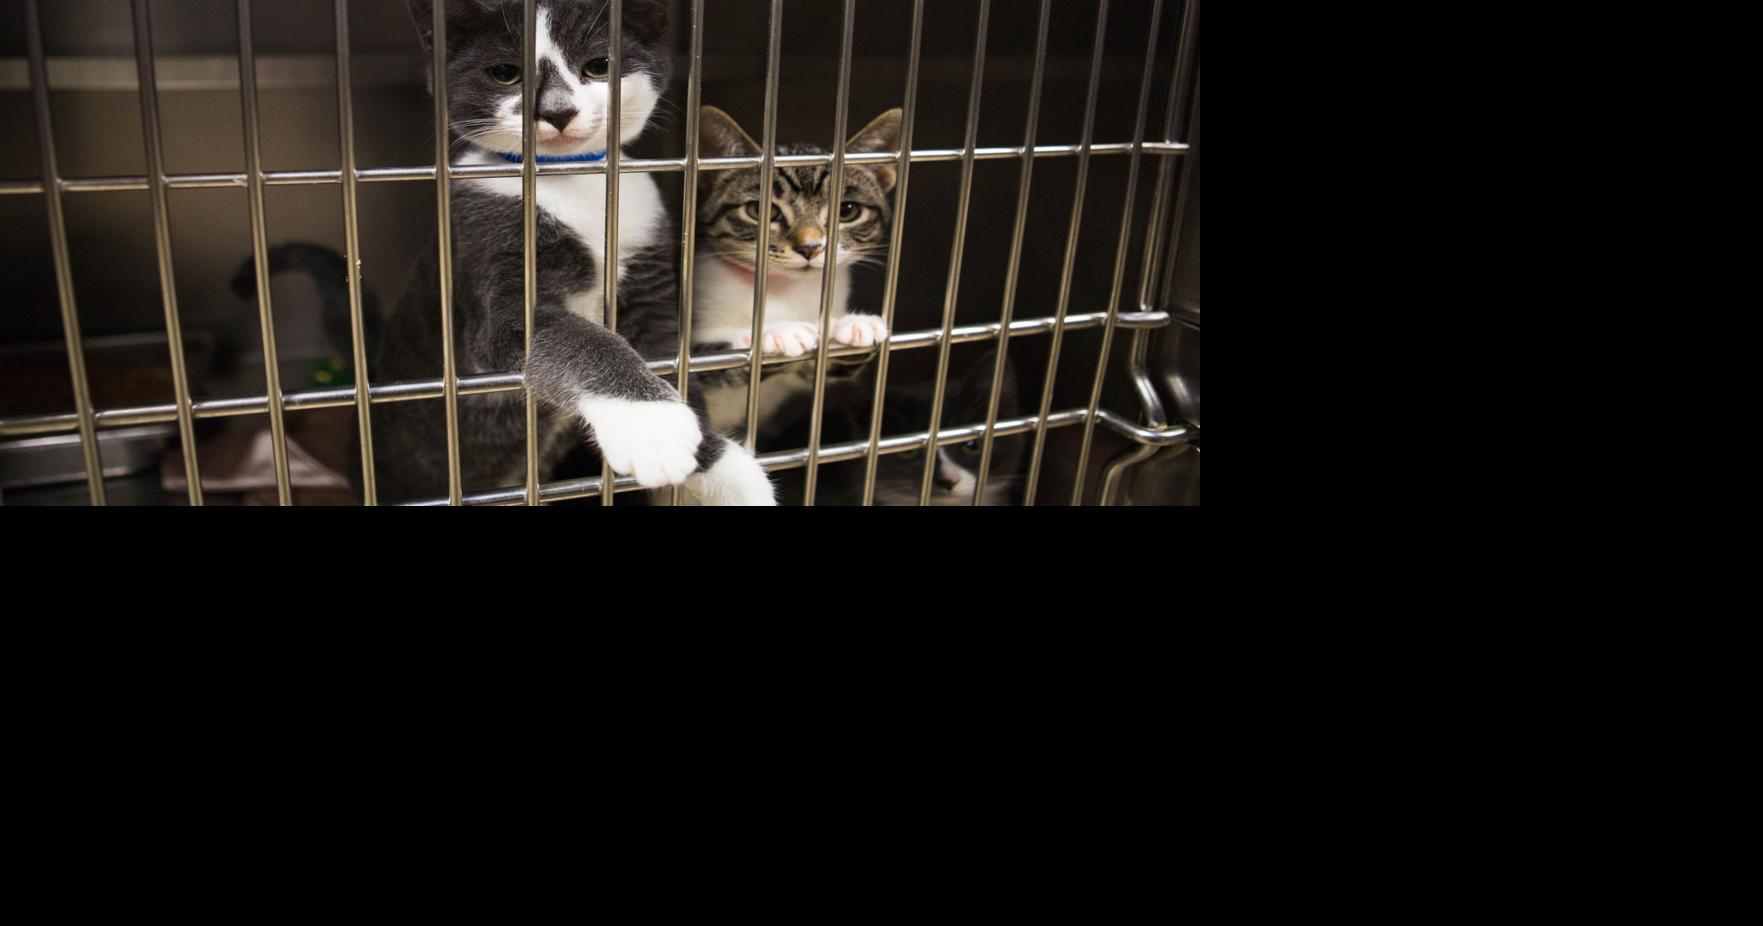 Animal control changes proposed in Yakima could help address roaming cats | Local